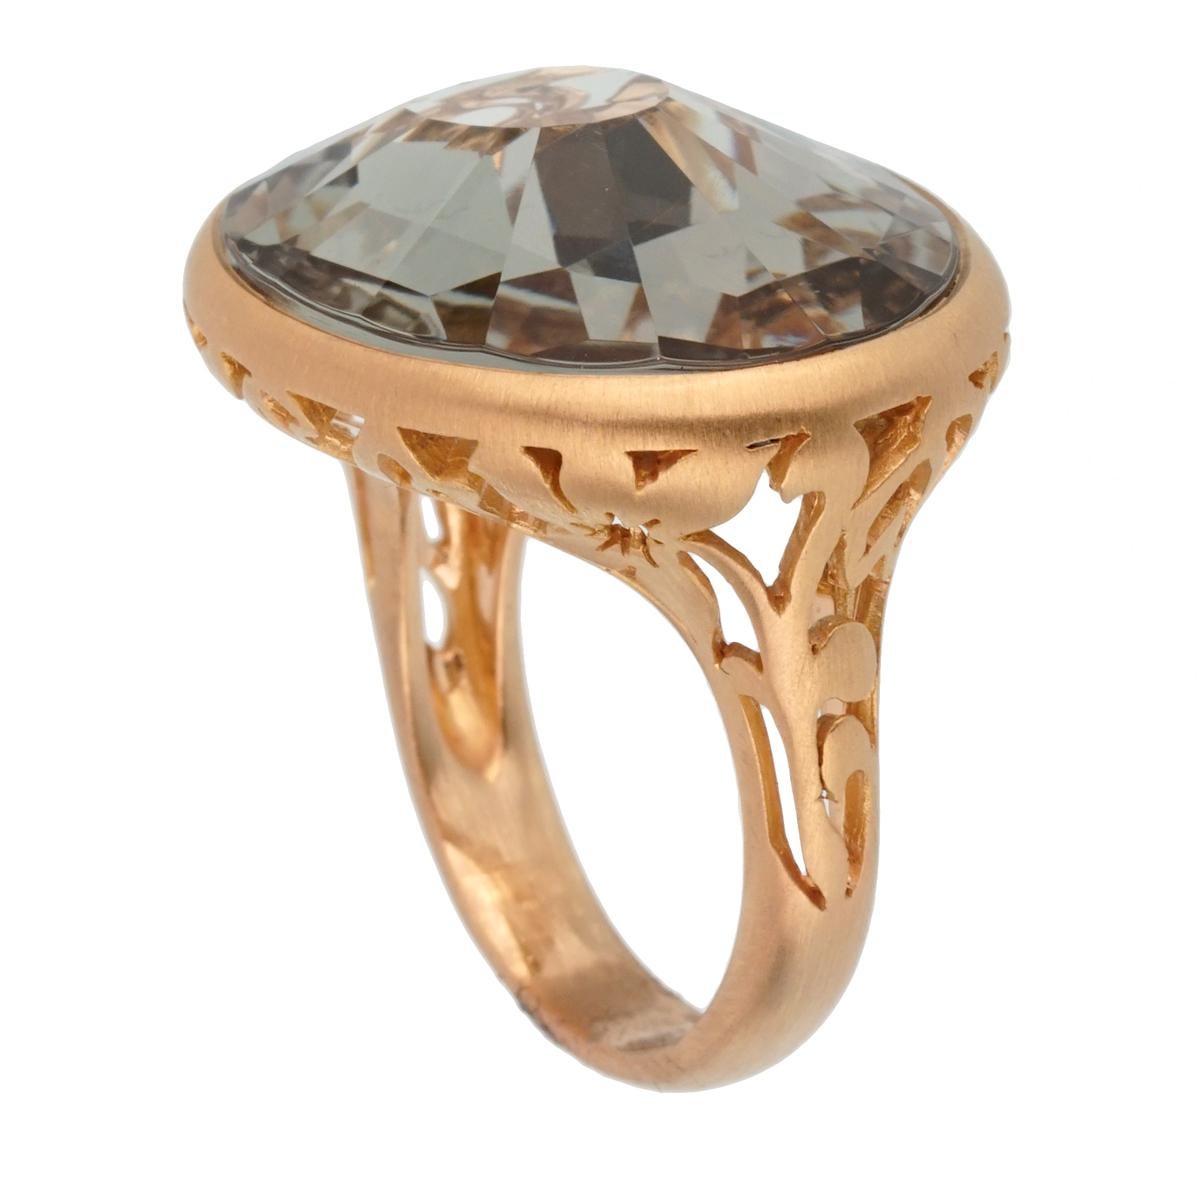 A chic brand new Pomellato cocktail ring showcasing a 10.19ct Green Prasiolite set in 18k rose gold. The ring measures a size 6.75 and can be resized

Pomellato Retail: $5500
Sku: 2440